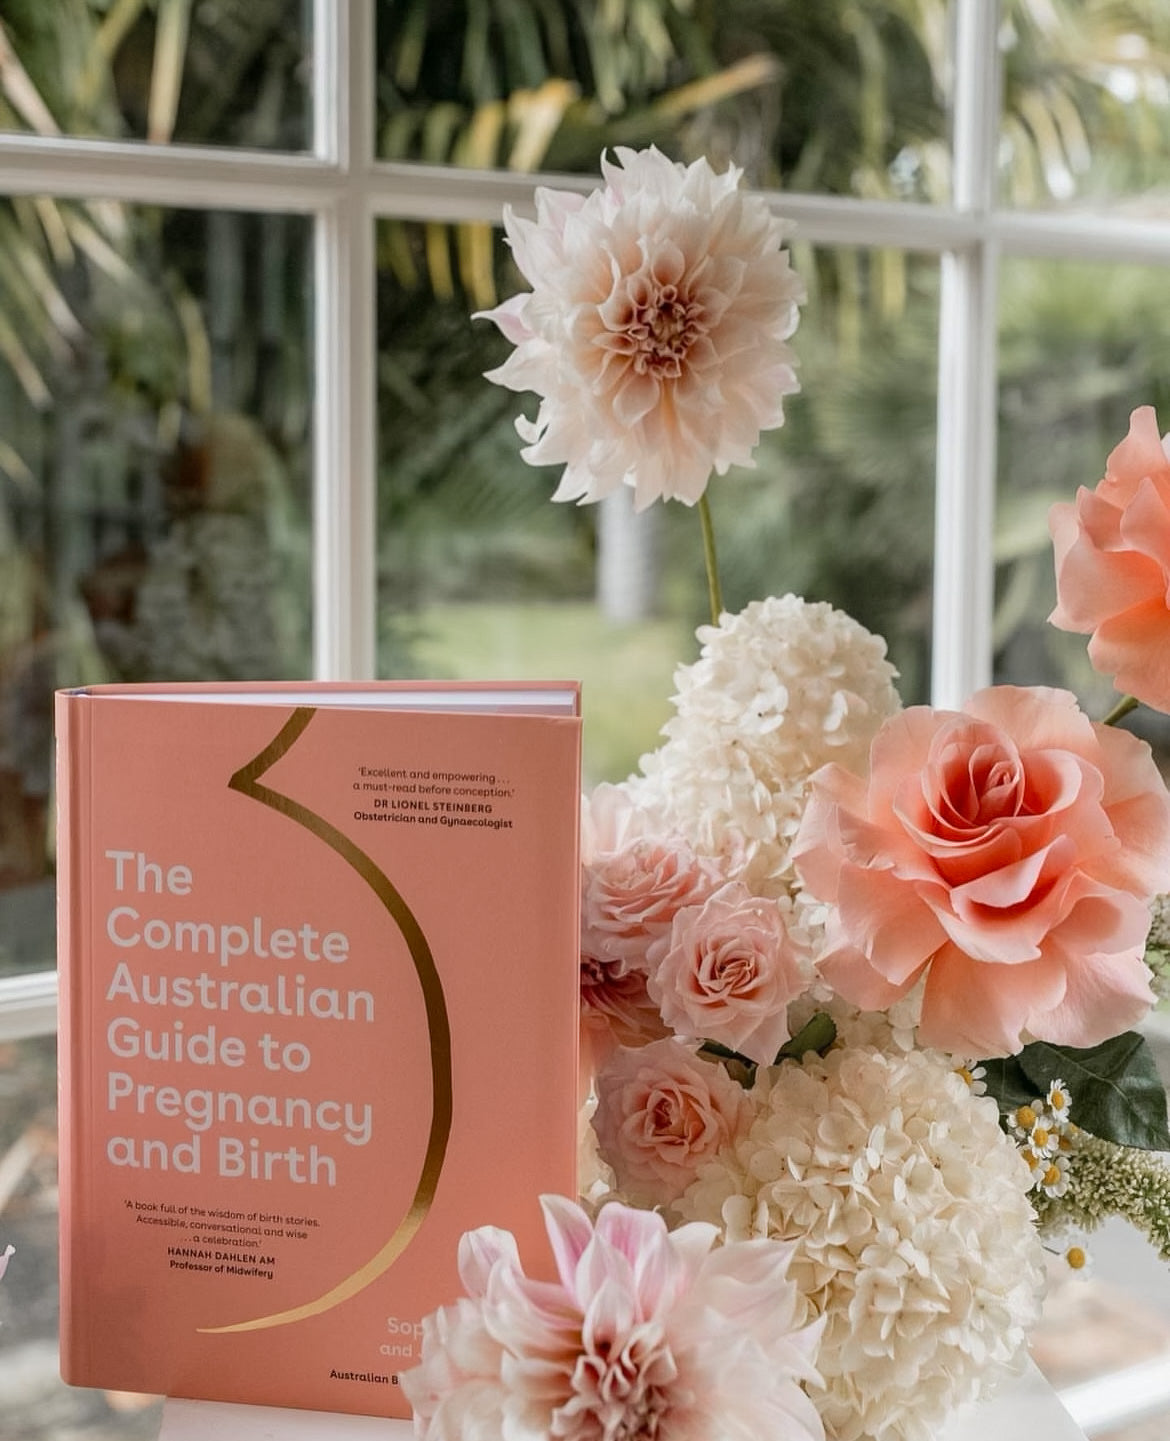 The Complete Australian Guide to Pregnancy and Birth